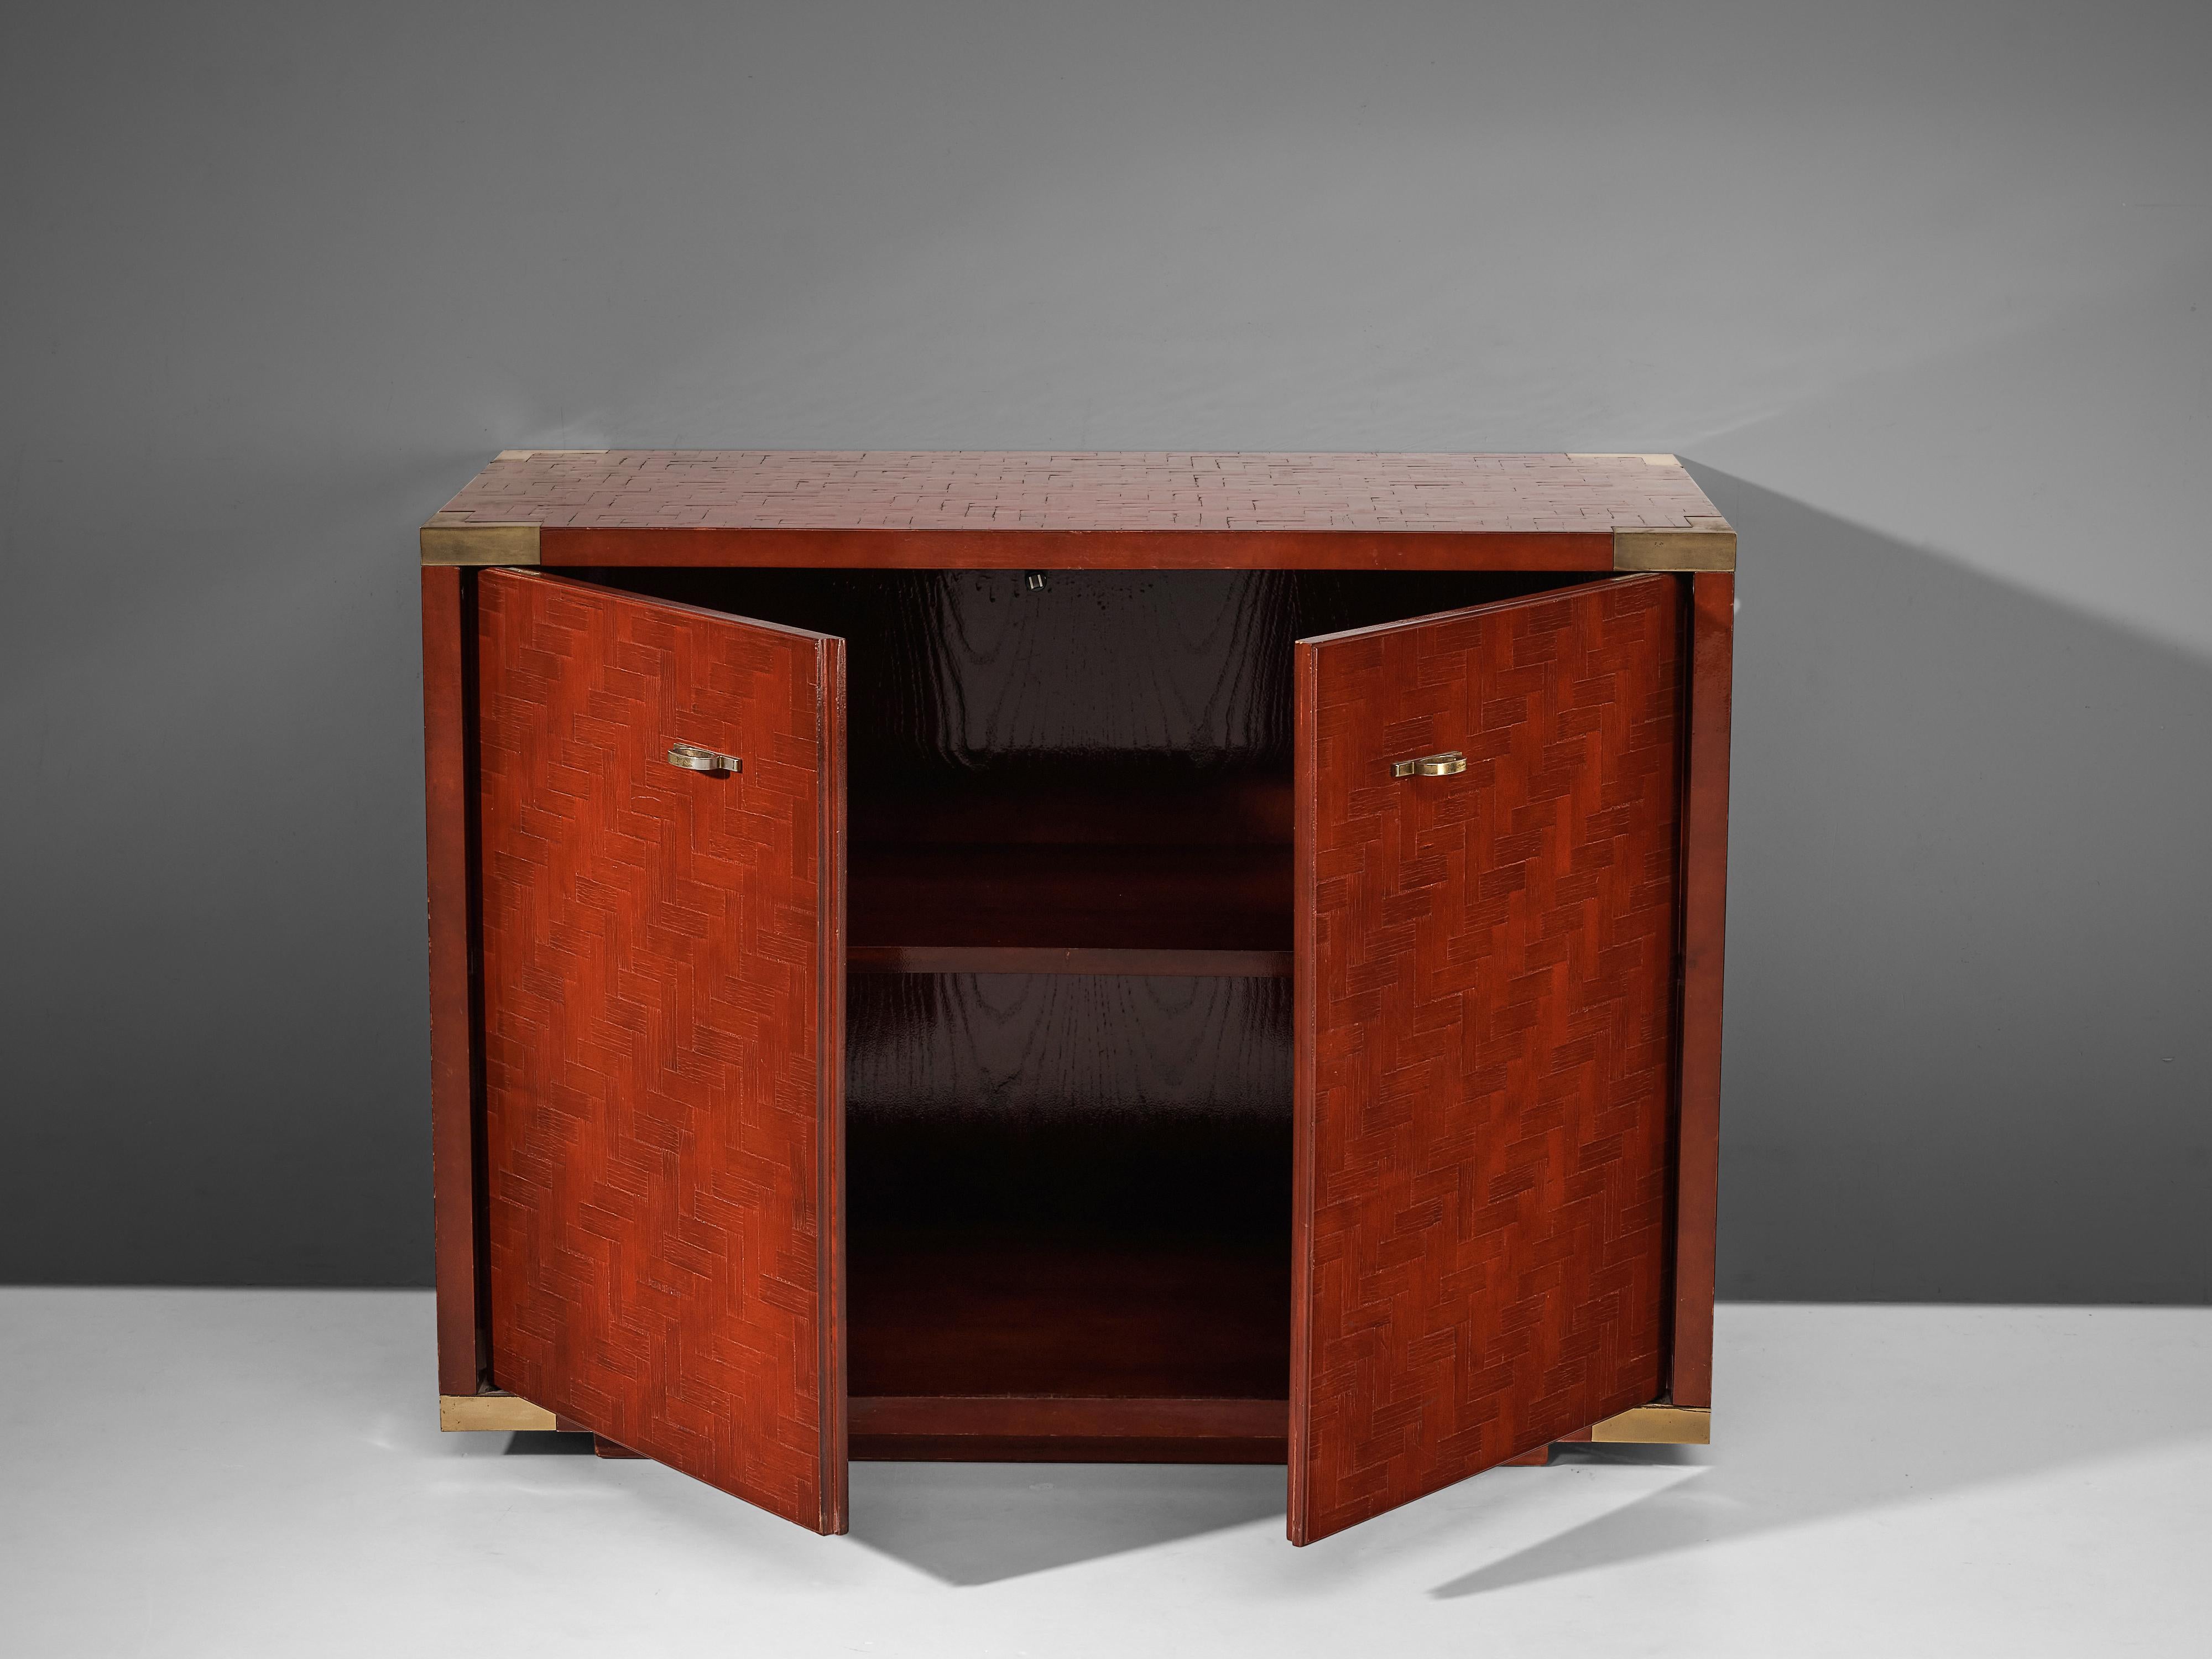 Textured Red Cabinet with Lacquered Surface and Brass 3